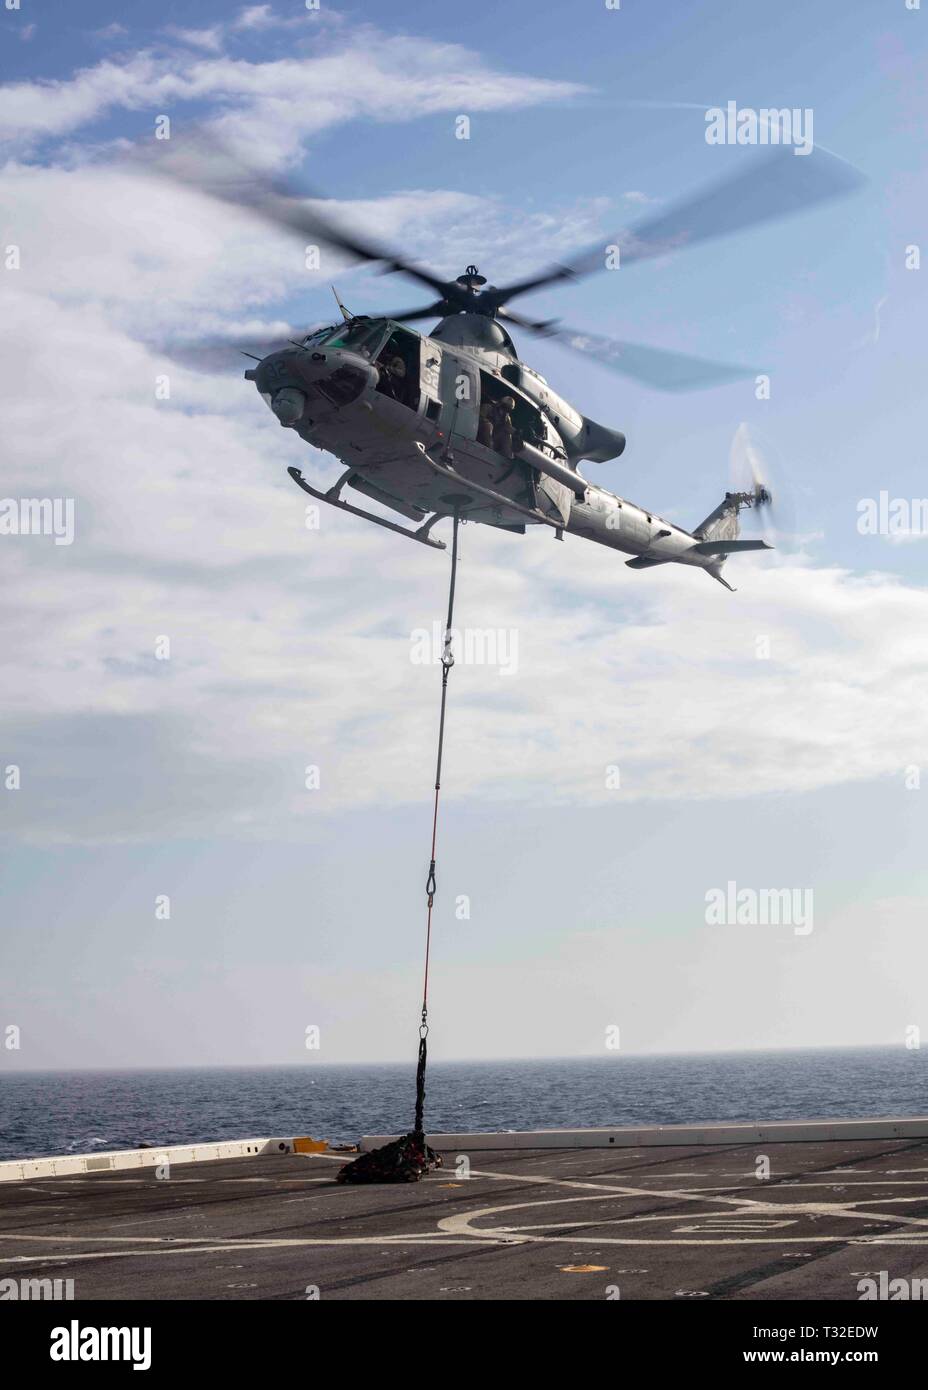 190401-N-HG389-0083 MEDITERRANEAN SEA (April 1, 2019) A UH-1Y Huey helicopter assigned to the “Black Knights” of Marine Medium Tiltrotor Squadron (VMM) 264 (Reinforced) lifts pallets from the flight deck of the San Antonio-class amphibious transport dock ship USS Arlington (LPD 24), April 1, 2019. Arlington is on a scheduled deployment as part of the Kearsarge Amphibious Ready Group in support of maritime security operations, crisis response and theater security cooperation, while also providing a forward naval presence. (U.S. Navy photo by Mass Communication Specialist 2nd Class Brandon Parke Stock Photo